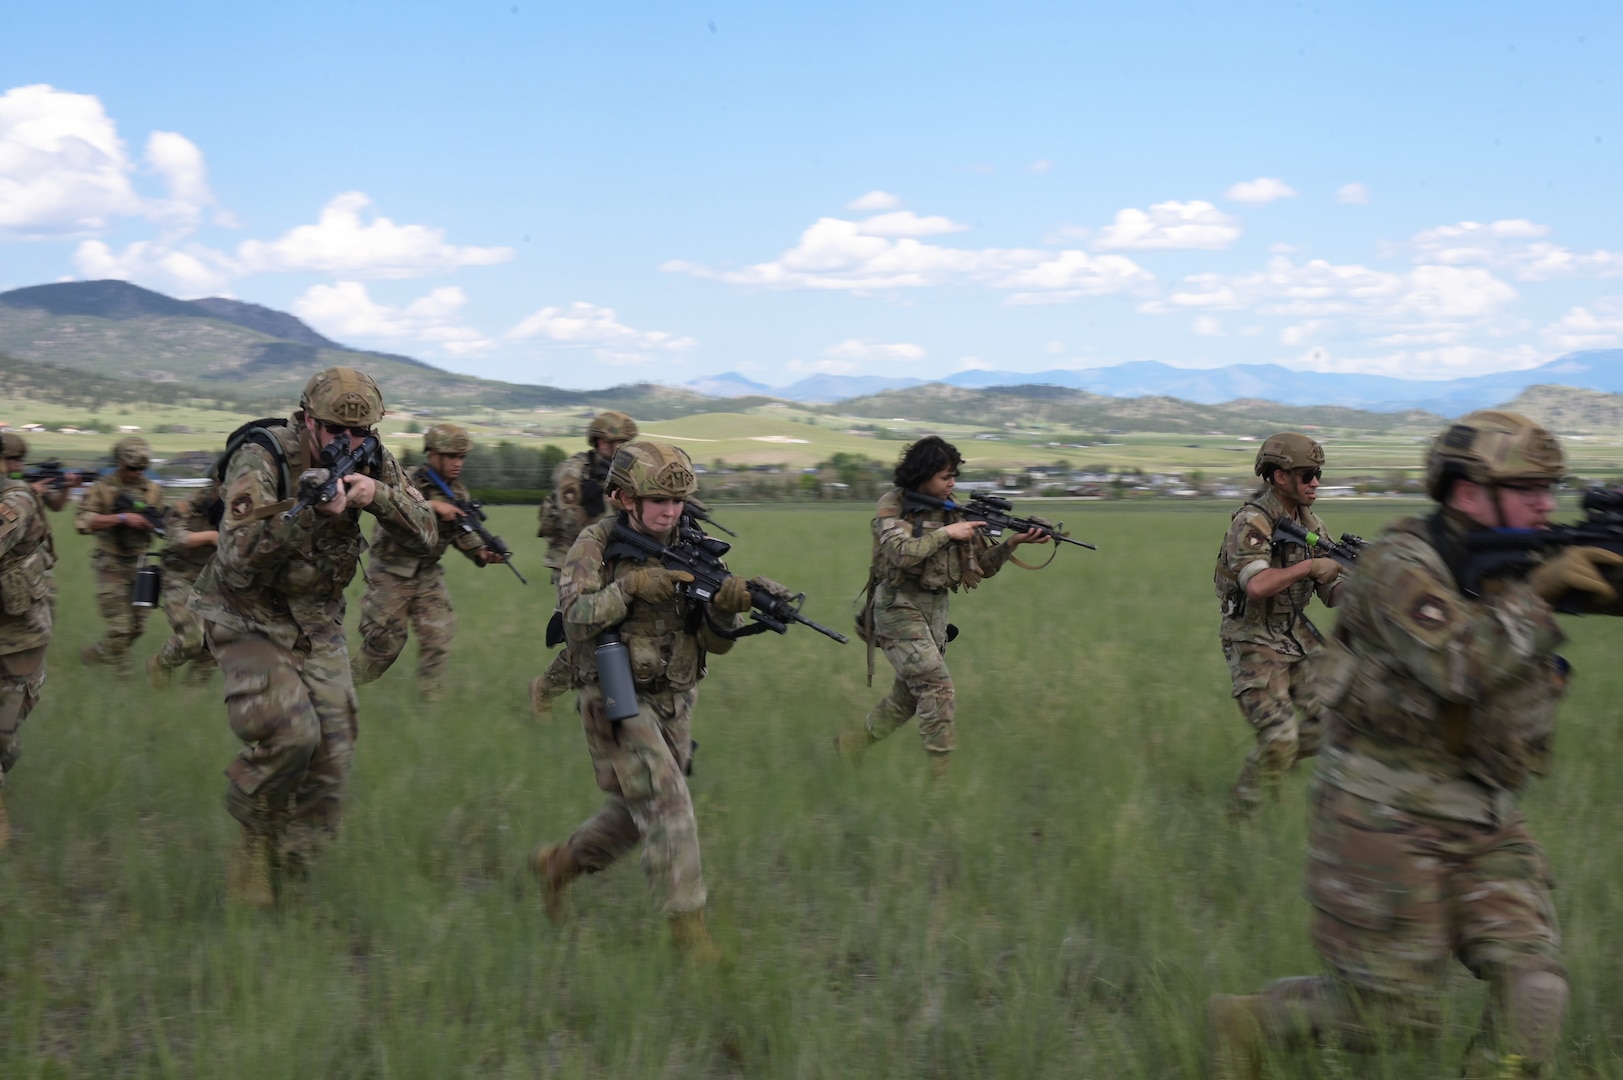 Airmen with the 841st Missile Security Forces Squadron conduct a team movement exercise during Operation Avalanche Defender at Fort William Henry Harrison, Mont., May 30, 2023. The four-day operation practiced pressing the offense against an enemy force, a critical skillset to fight in the future to deter and stop aggression by peer adversaries.